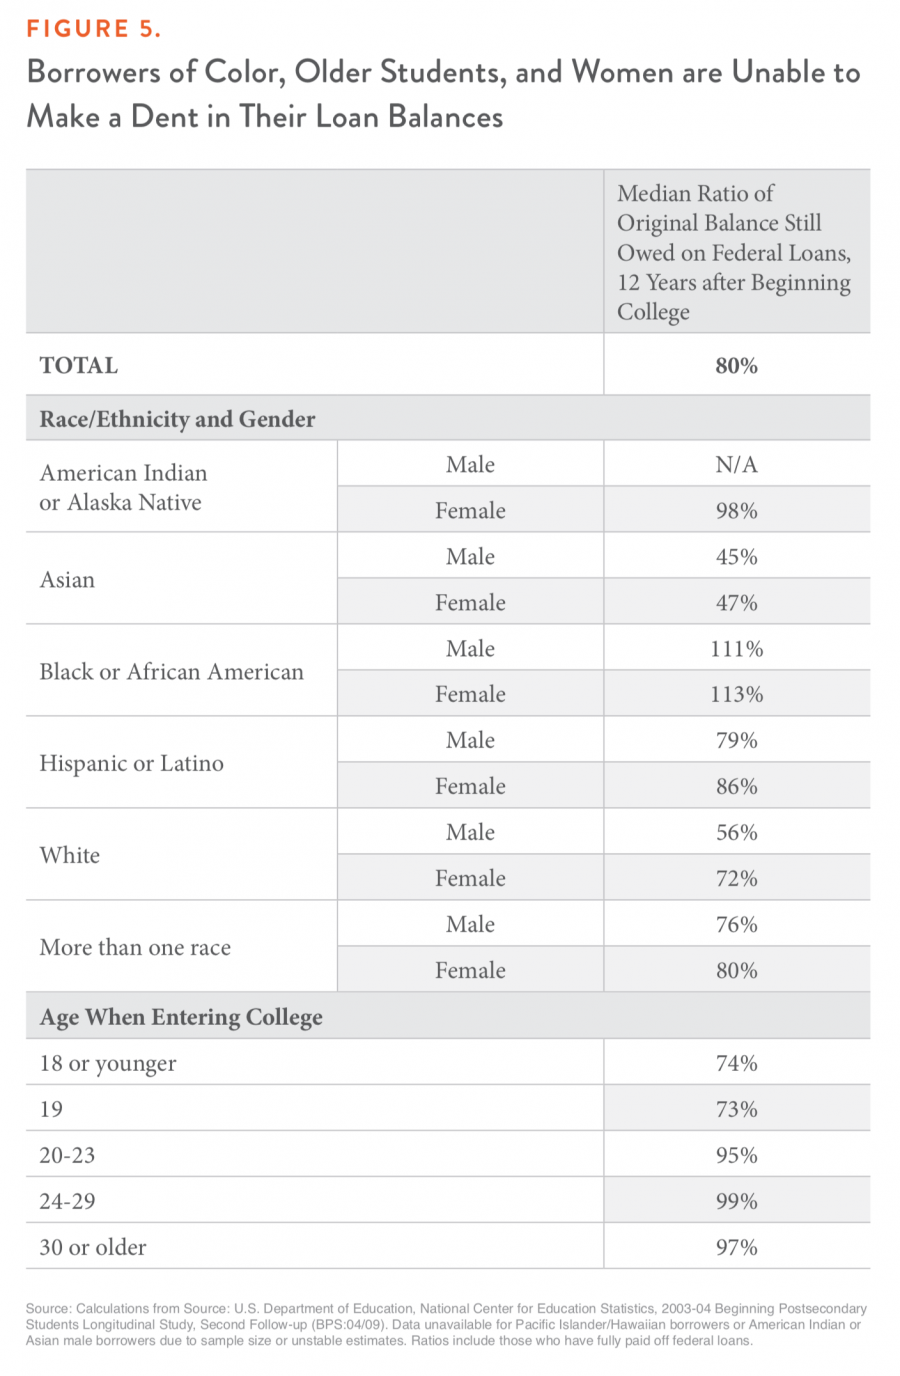 Figure 5. Borrowers of Color, Older Students, and Women are Unable to Make a Dent in Their Loan Balances